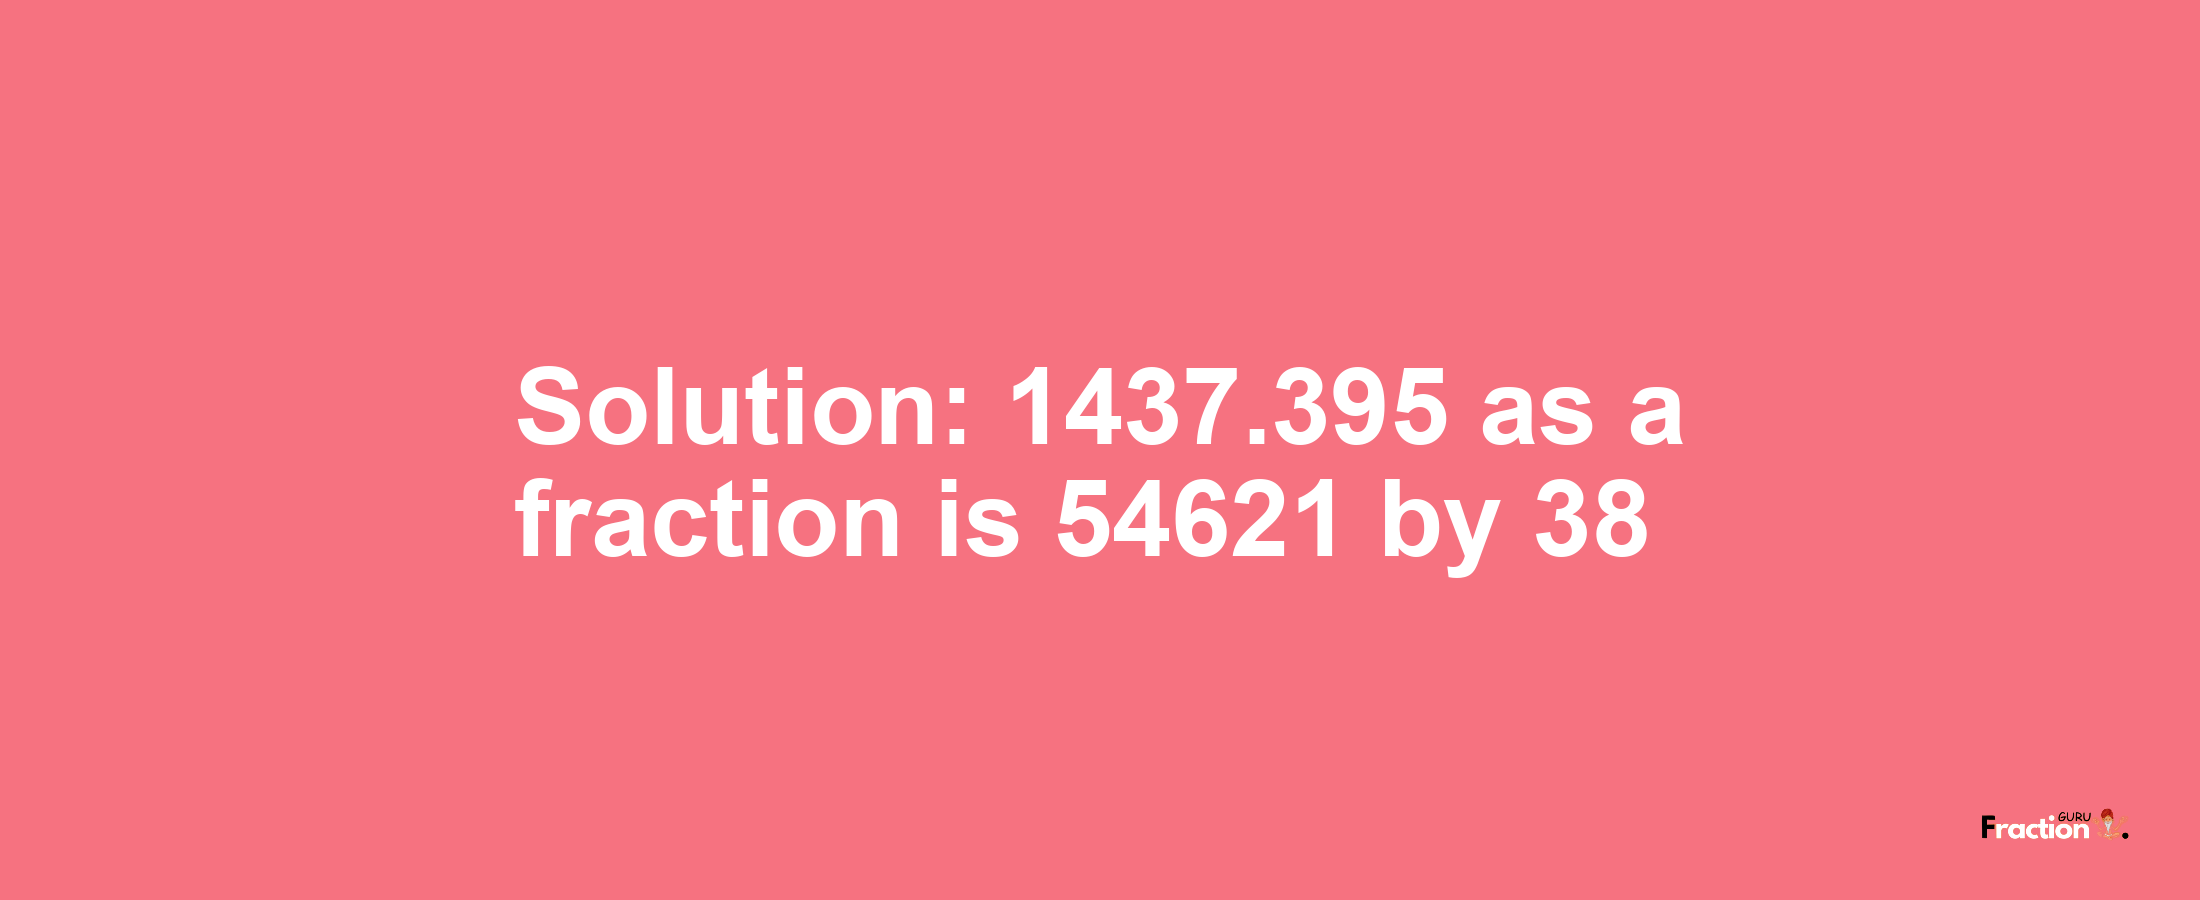 Solution:1437.395 as a fraction is 54621/38